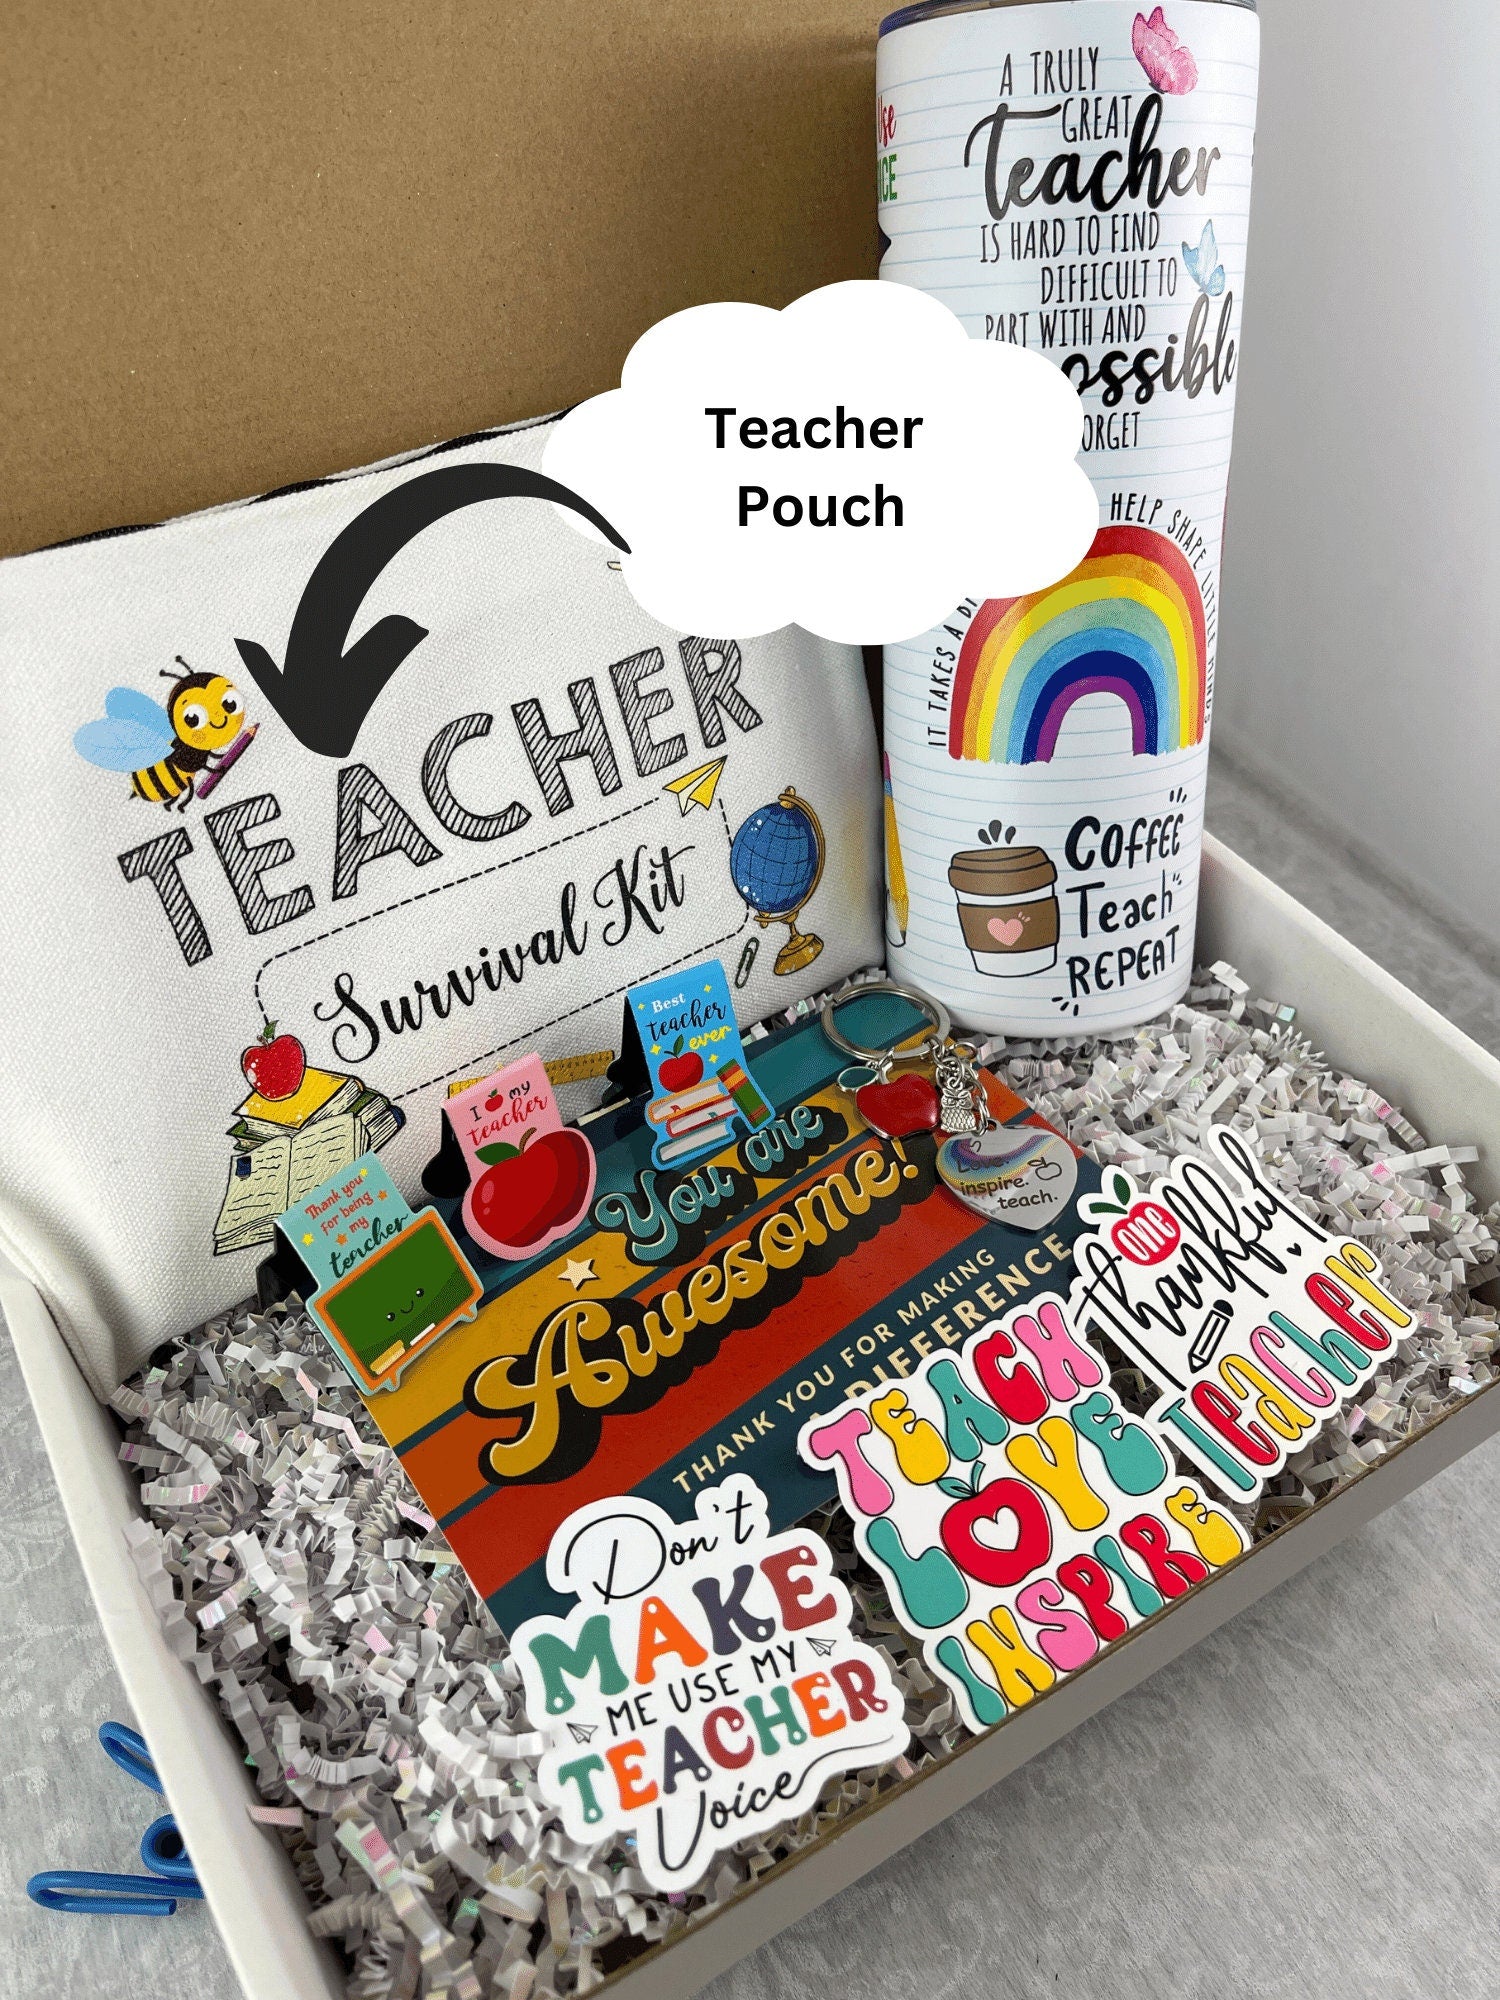 45 Best Gifts for Teachers That They'll Genuinely Love